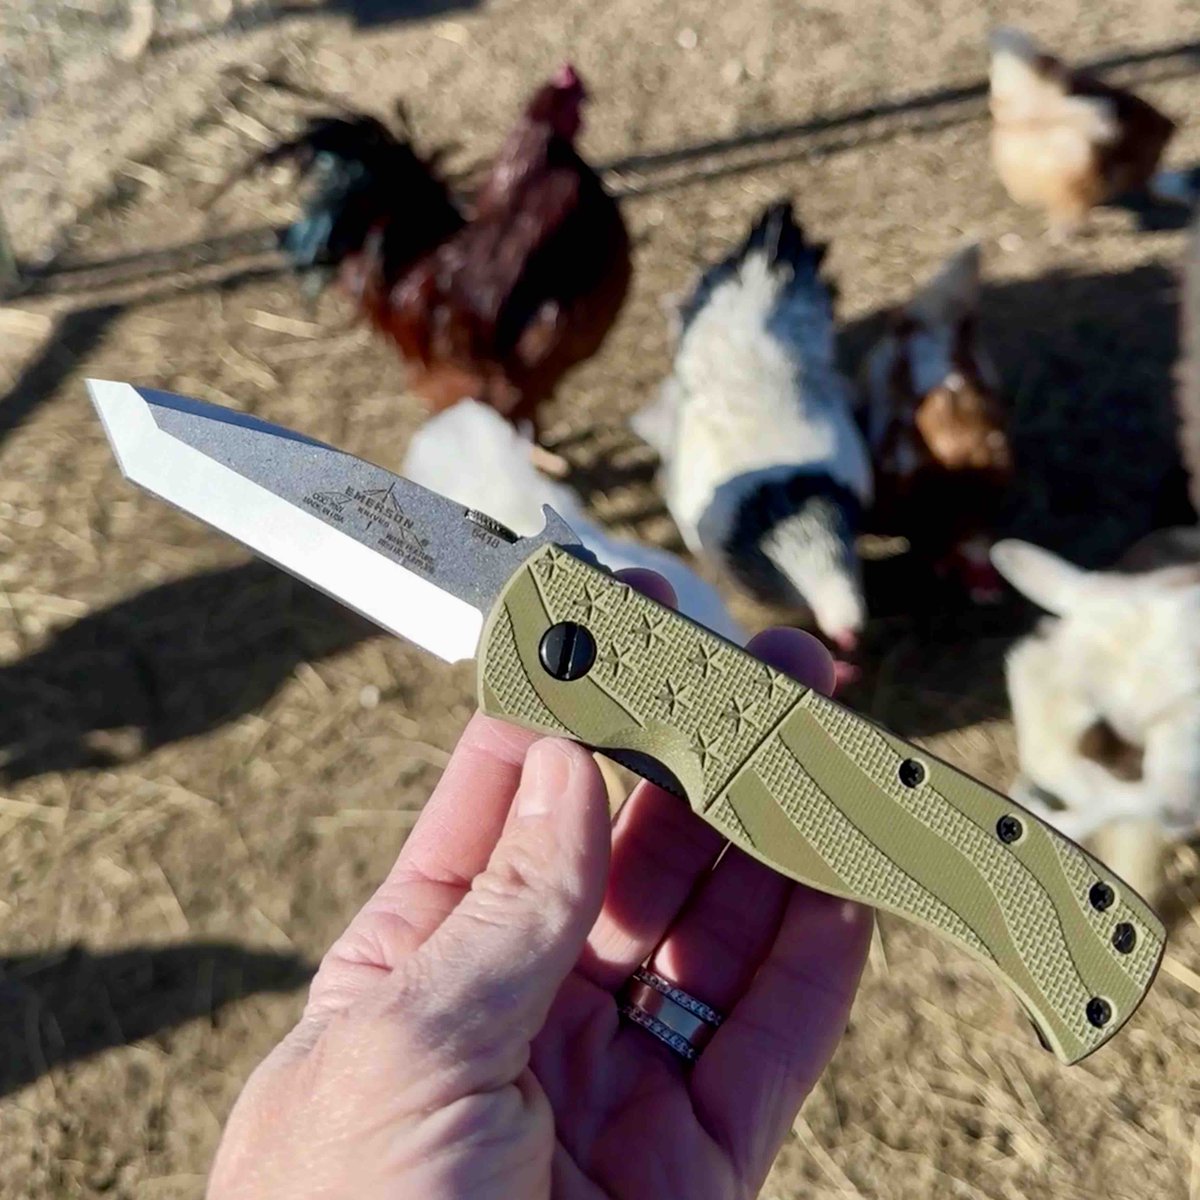 Where are my chicken rancher people at? 

#cqc7 #emersonknives #madeintheusa